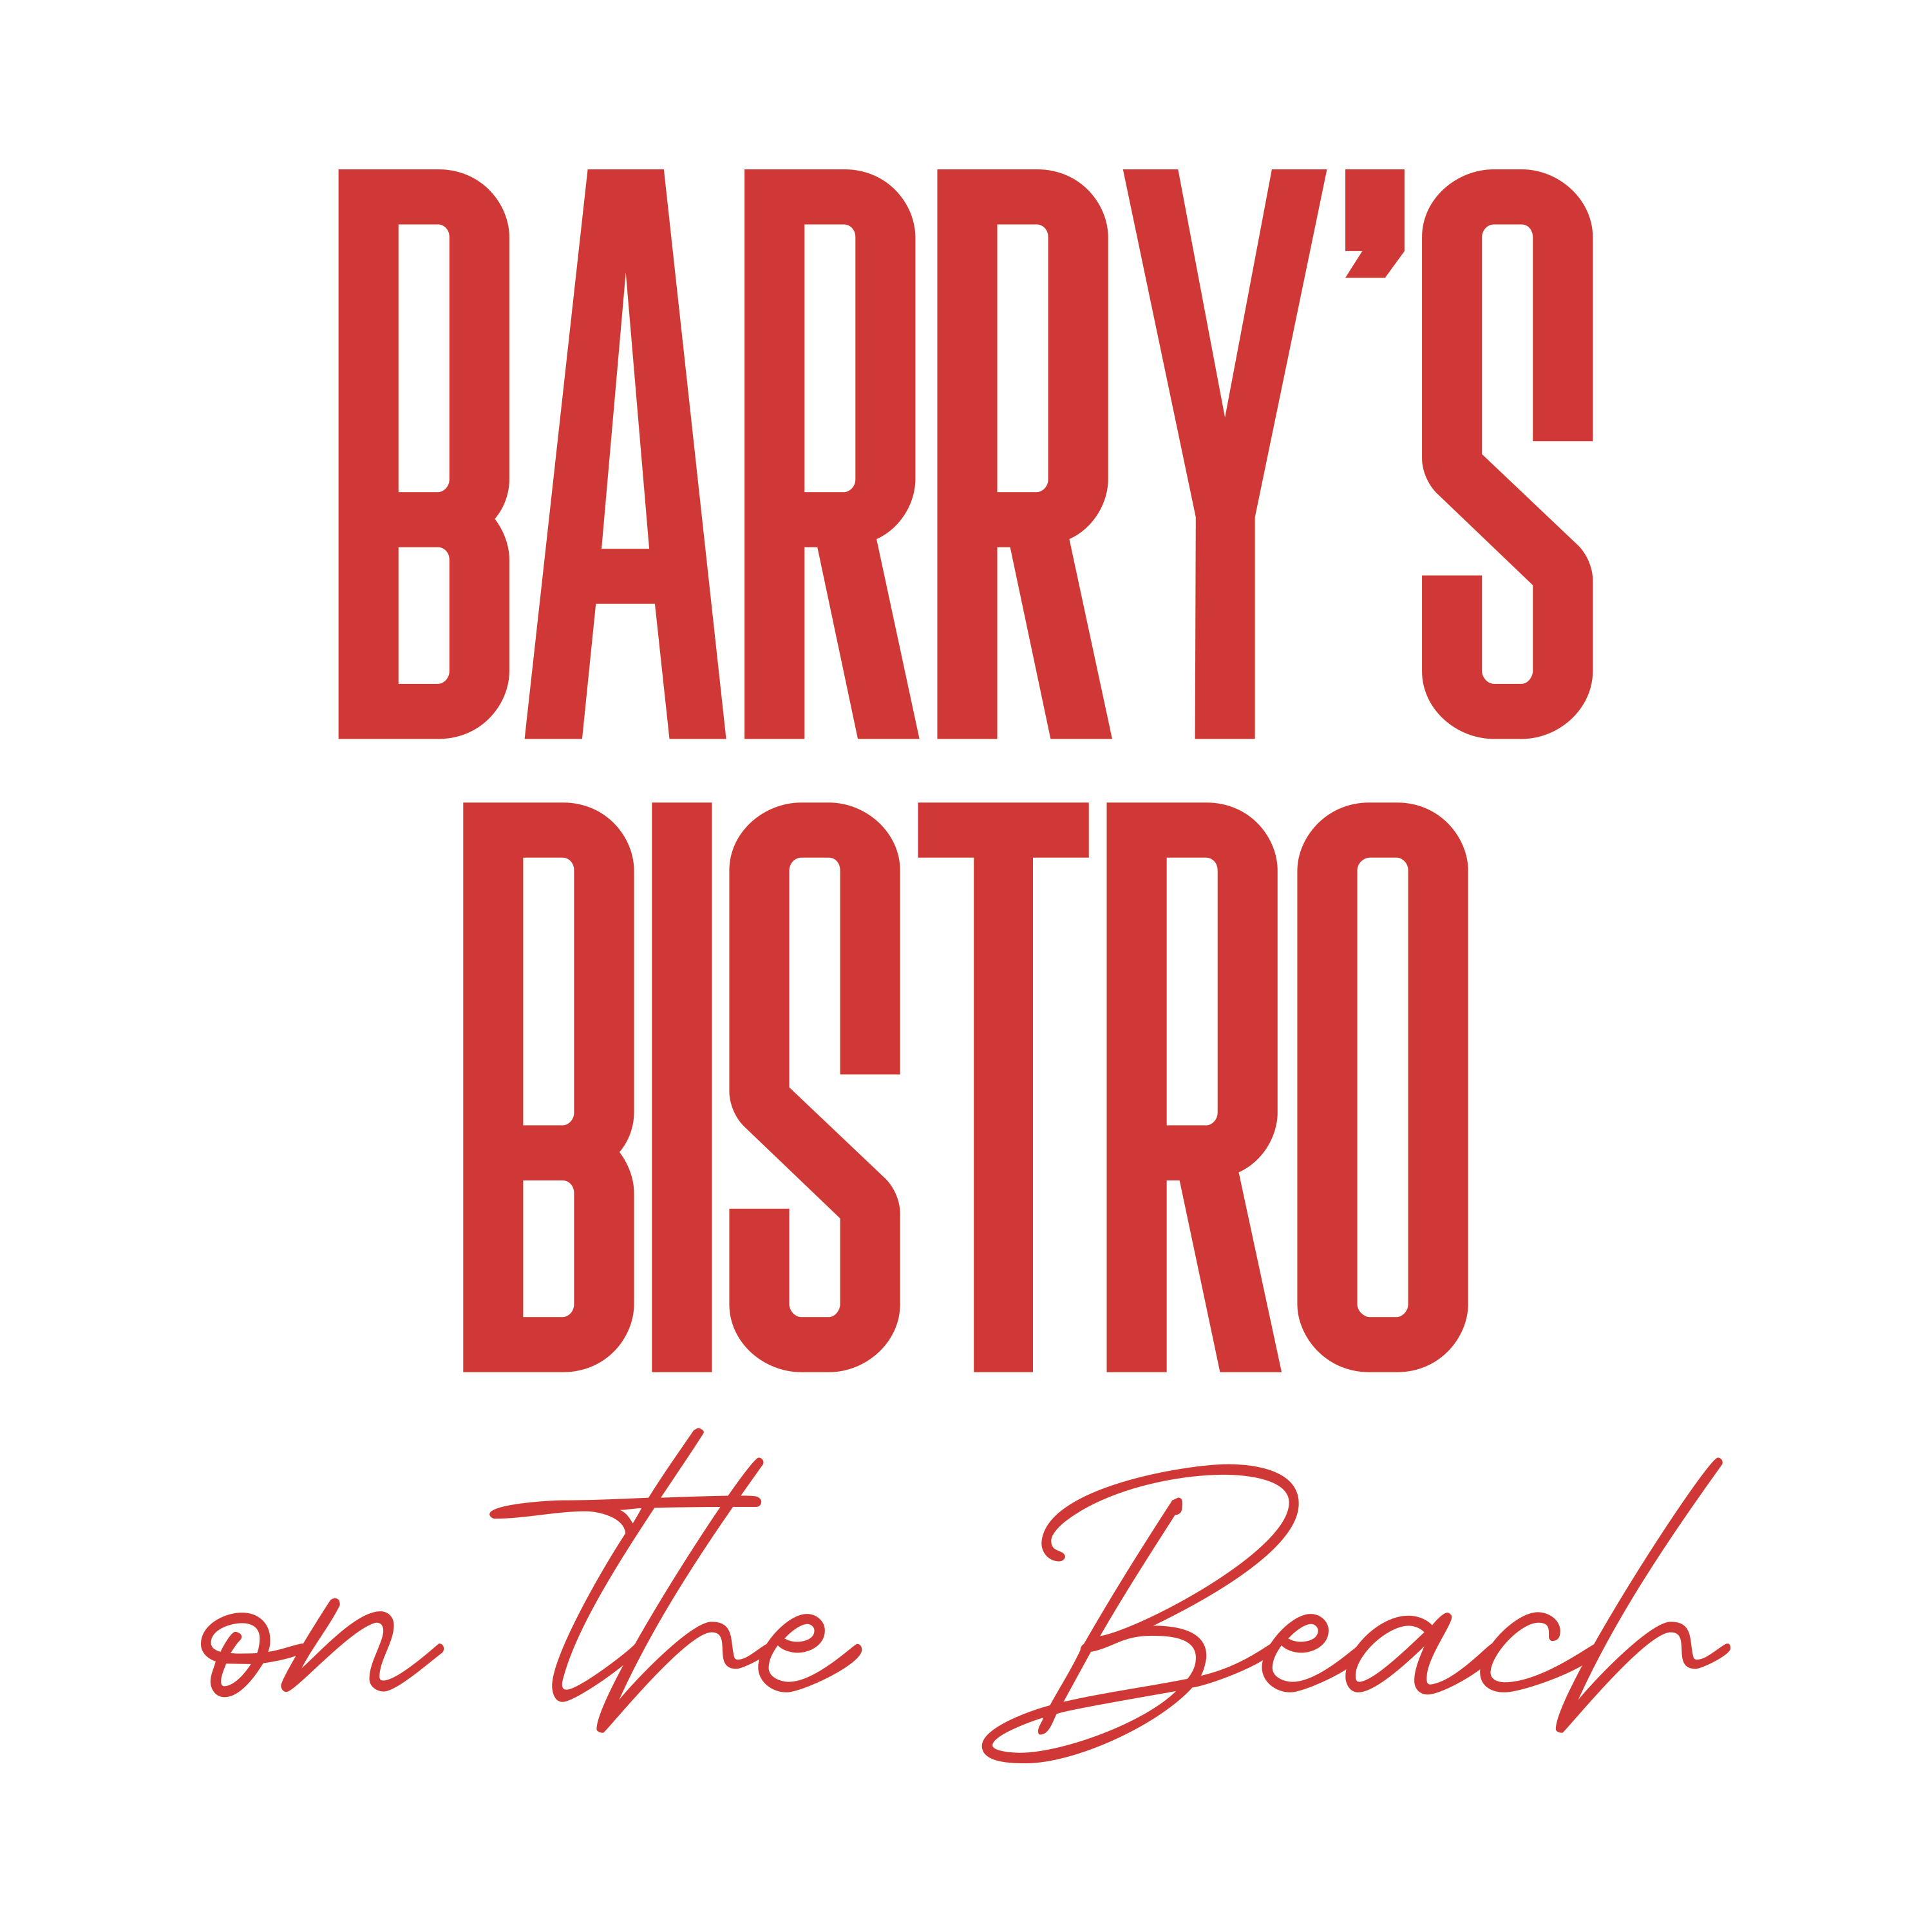 Barry's Bistro on the Beach